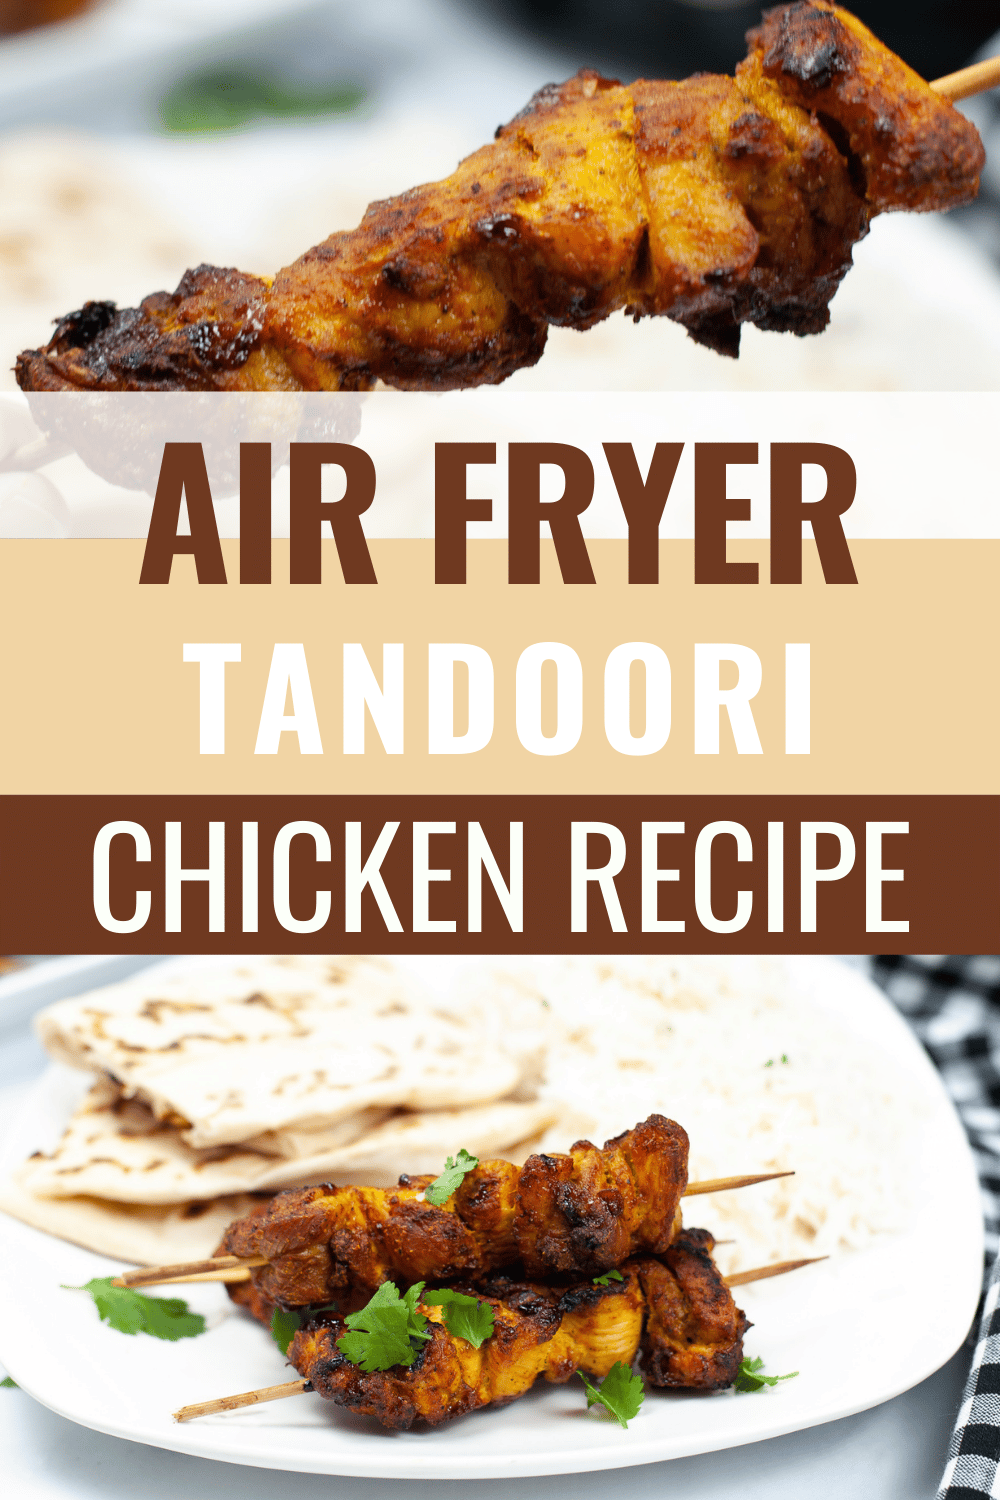 top image is of chicken on a skewer, bottom image is Air Fryer Tandoori Chicken on a plate with Naan bread and basmati rice garnished with parsley with title text reading Air Fryer Tandoori Chicken Recipe